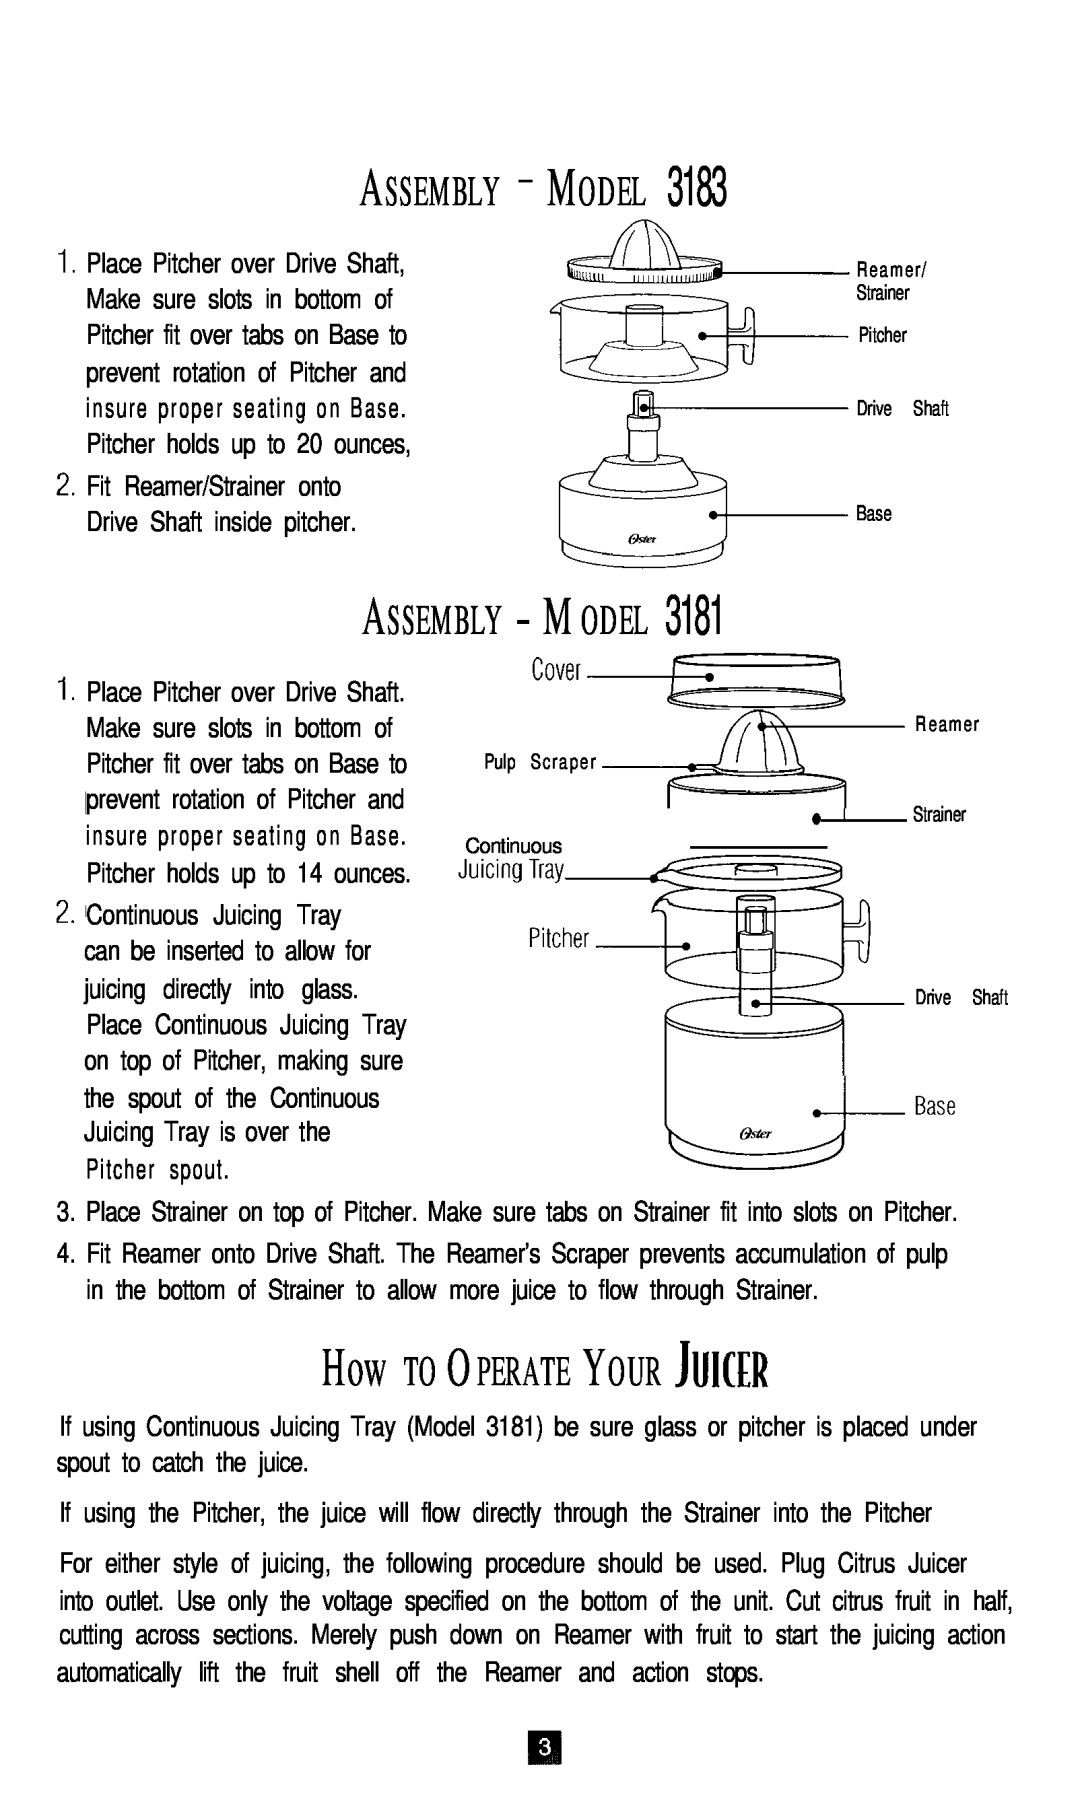 Oster 3183, 3181 instruction manual How TO O PERATE Y OUR JUICER, cover, Assembly - Model, Assembly - M Odel 